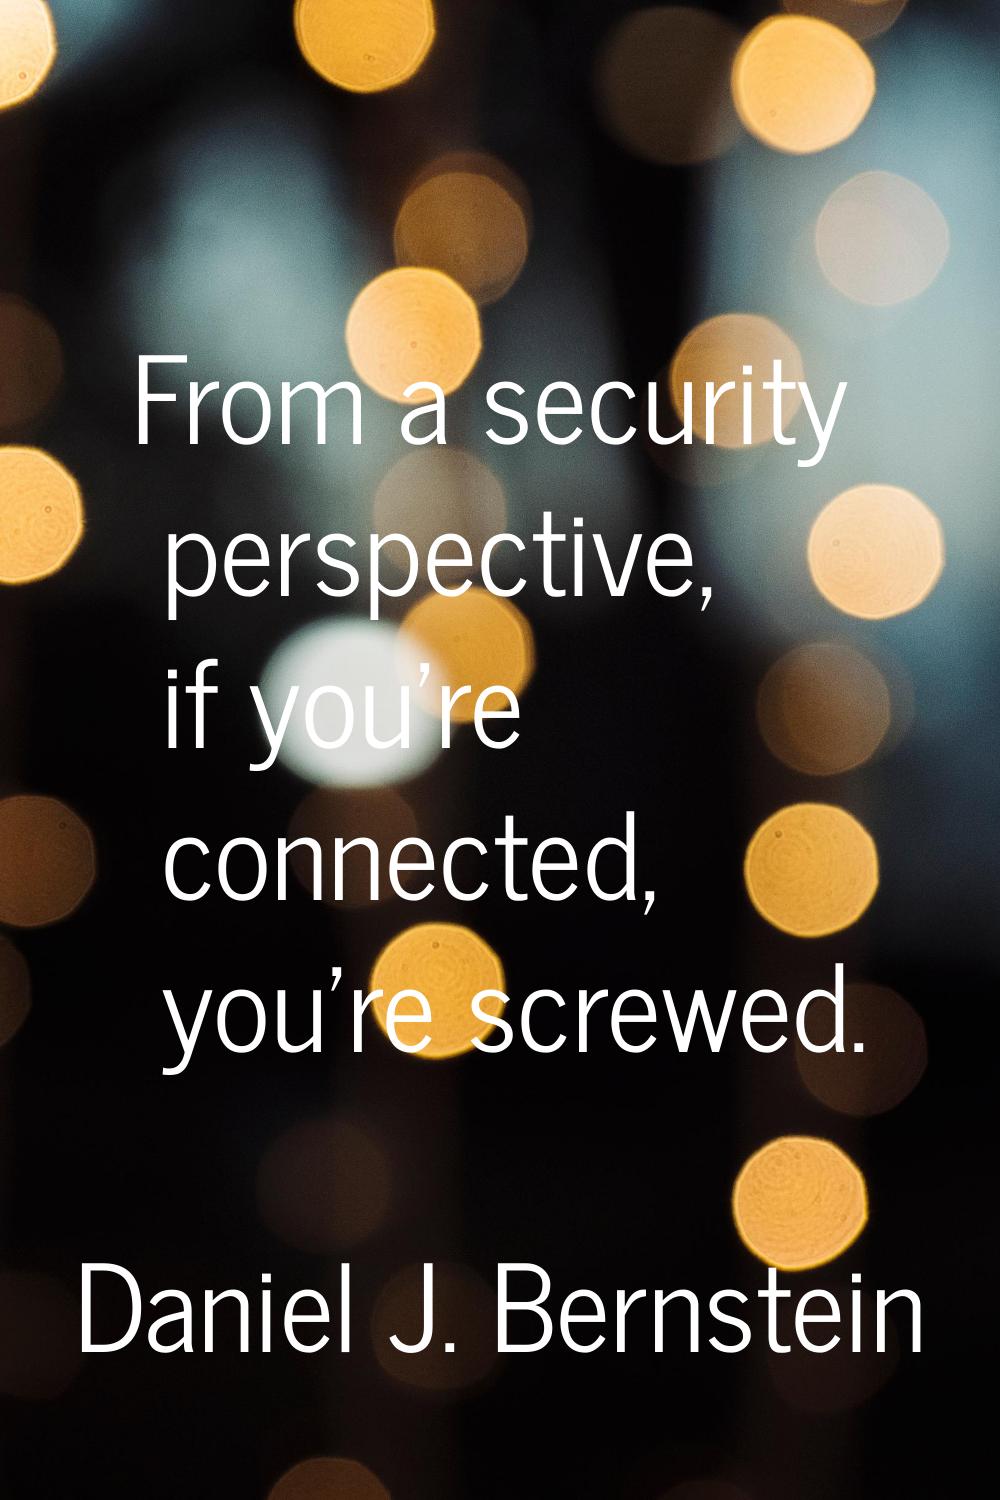 From a security perspective, if you're connected, you're screwed.